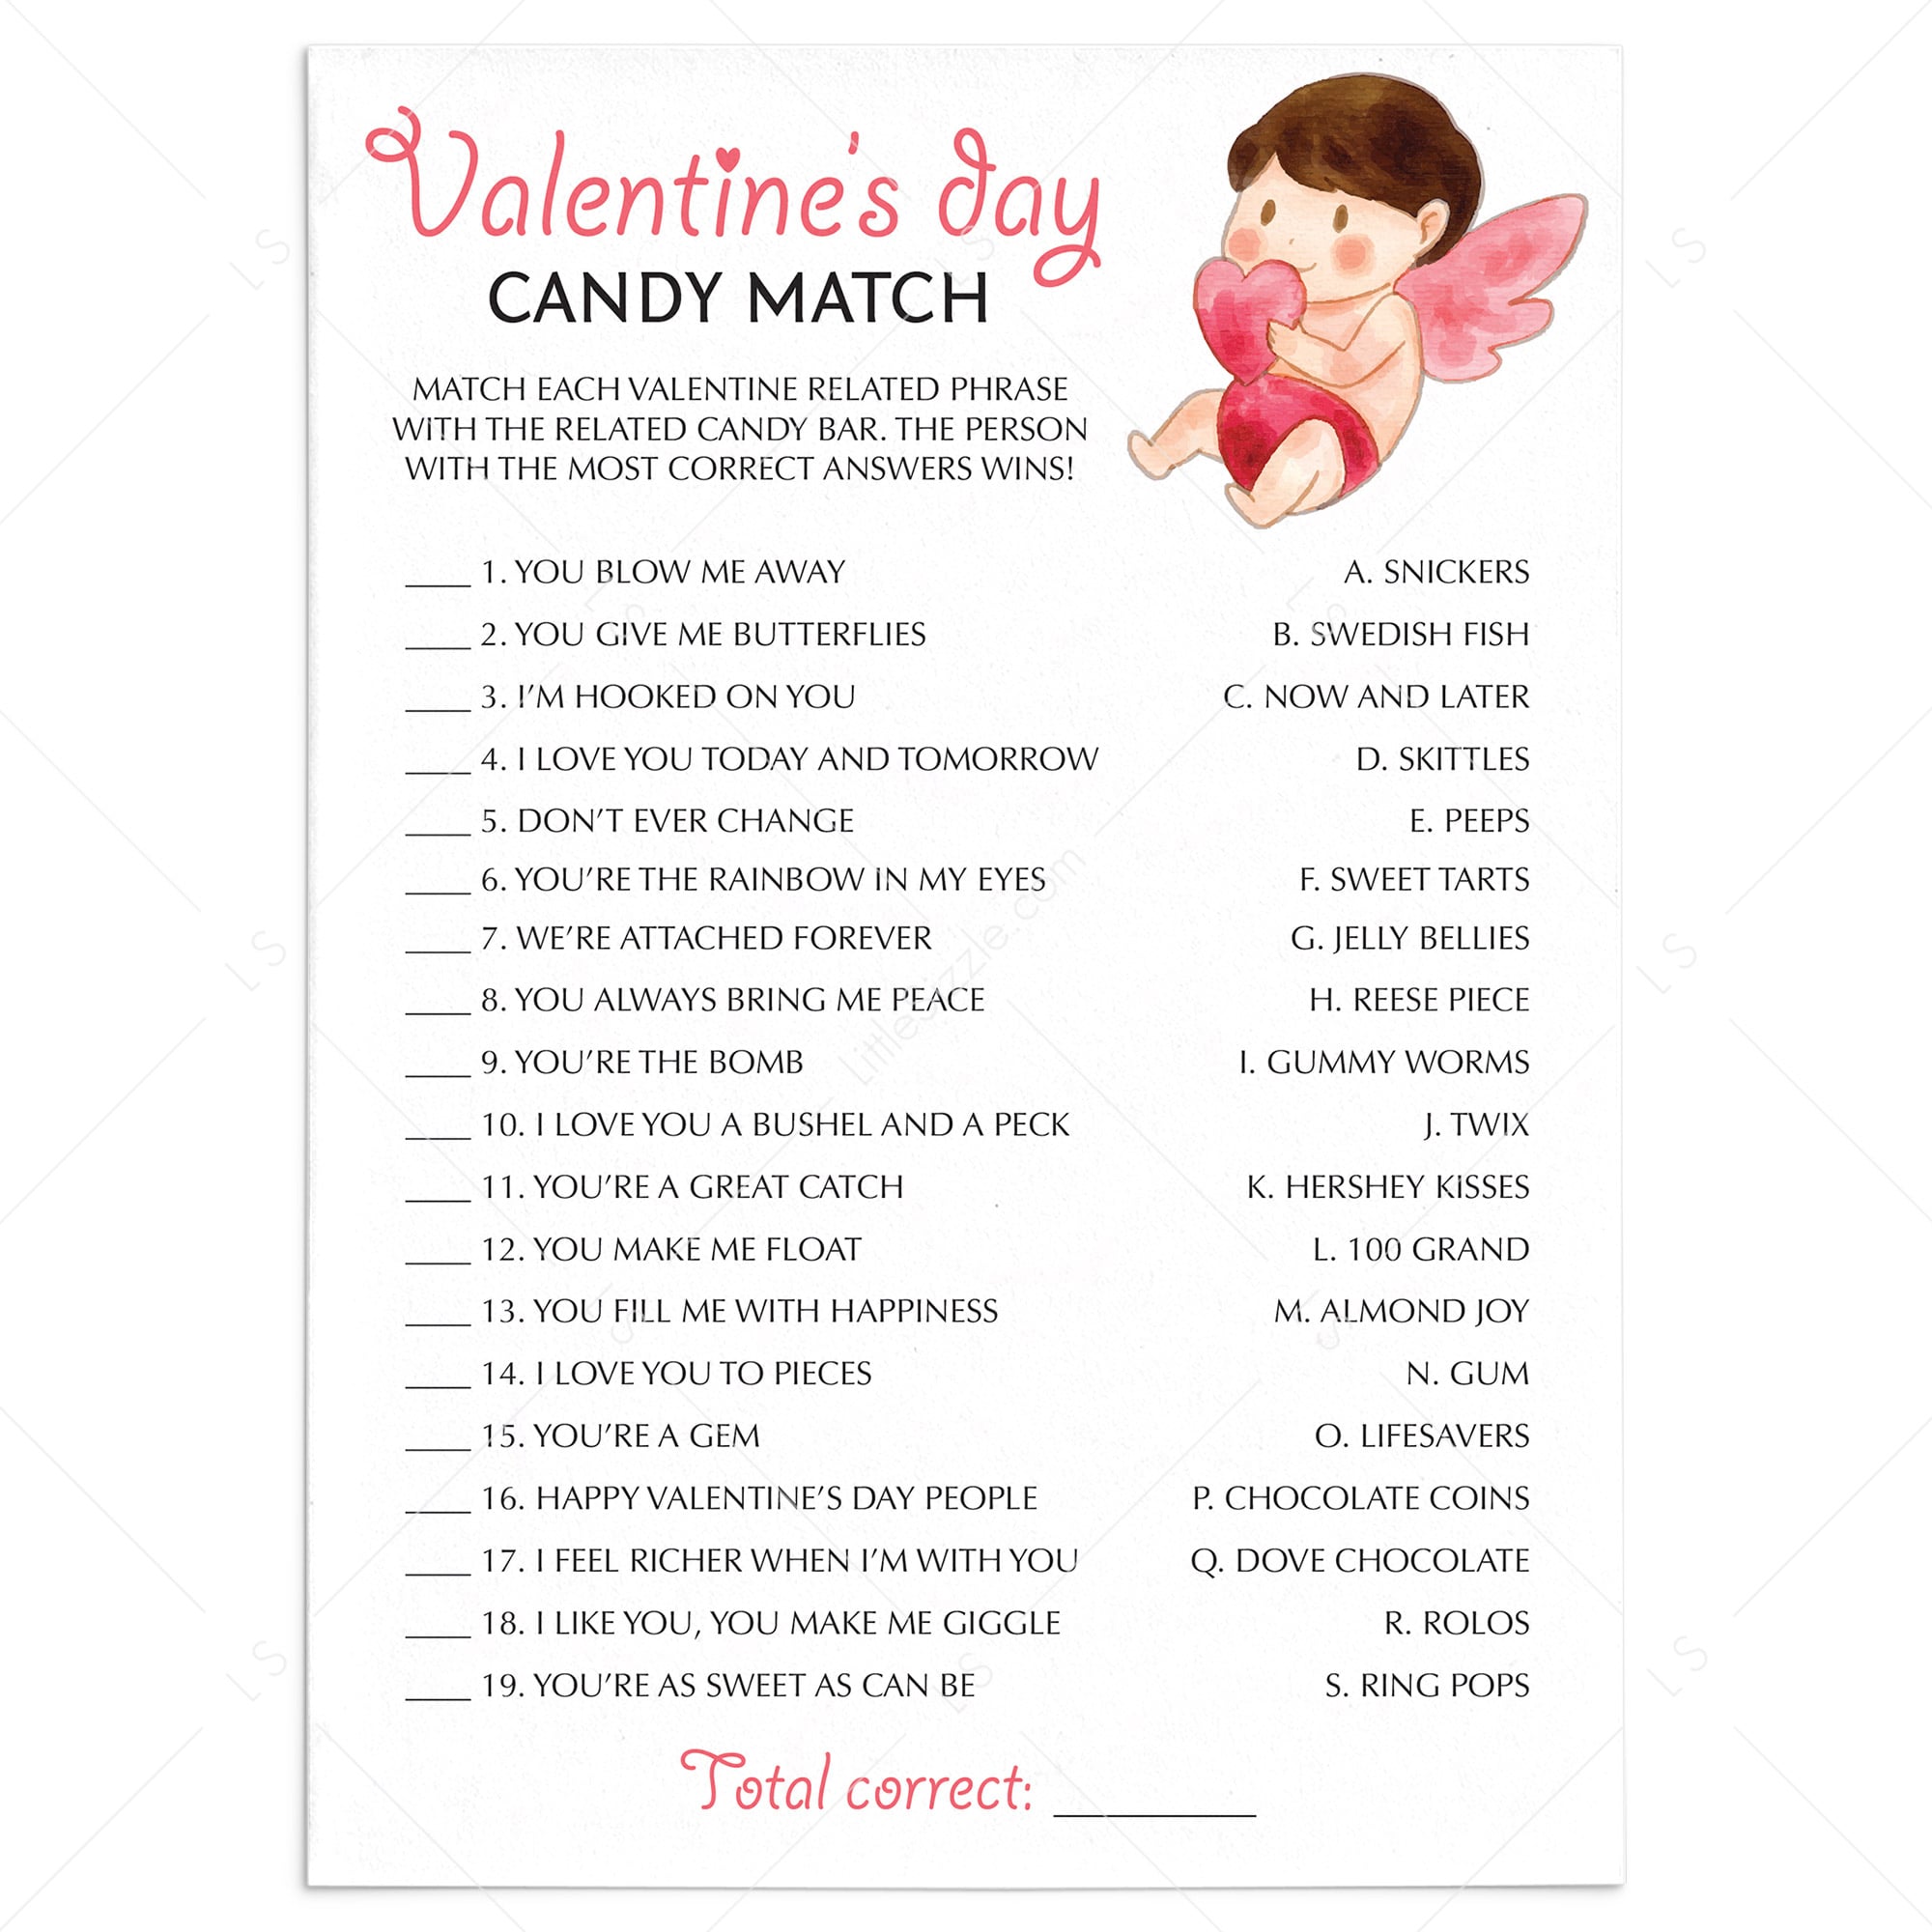 Fun Valentine's Day Game Candy Match Printable by LittleSizzle